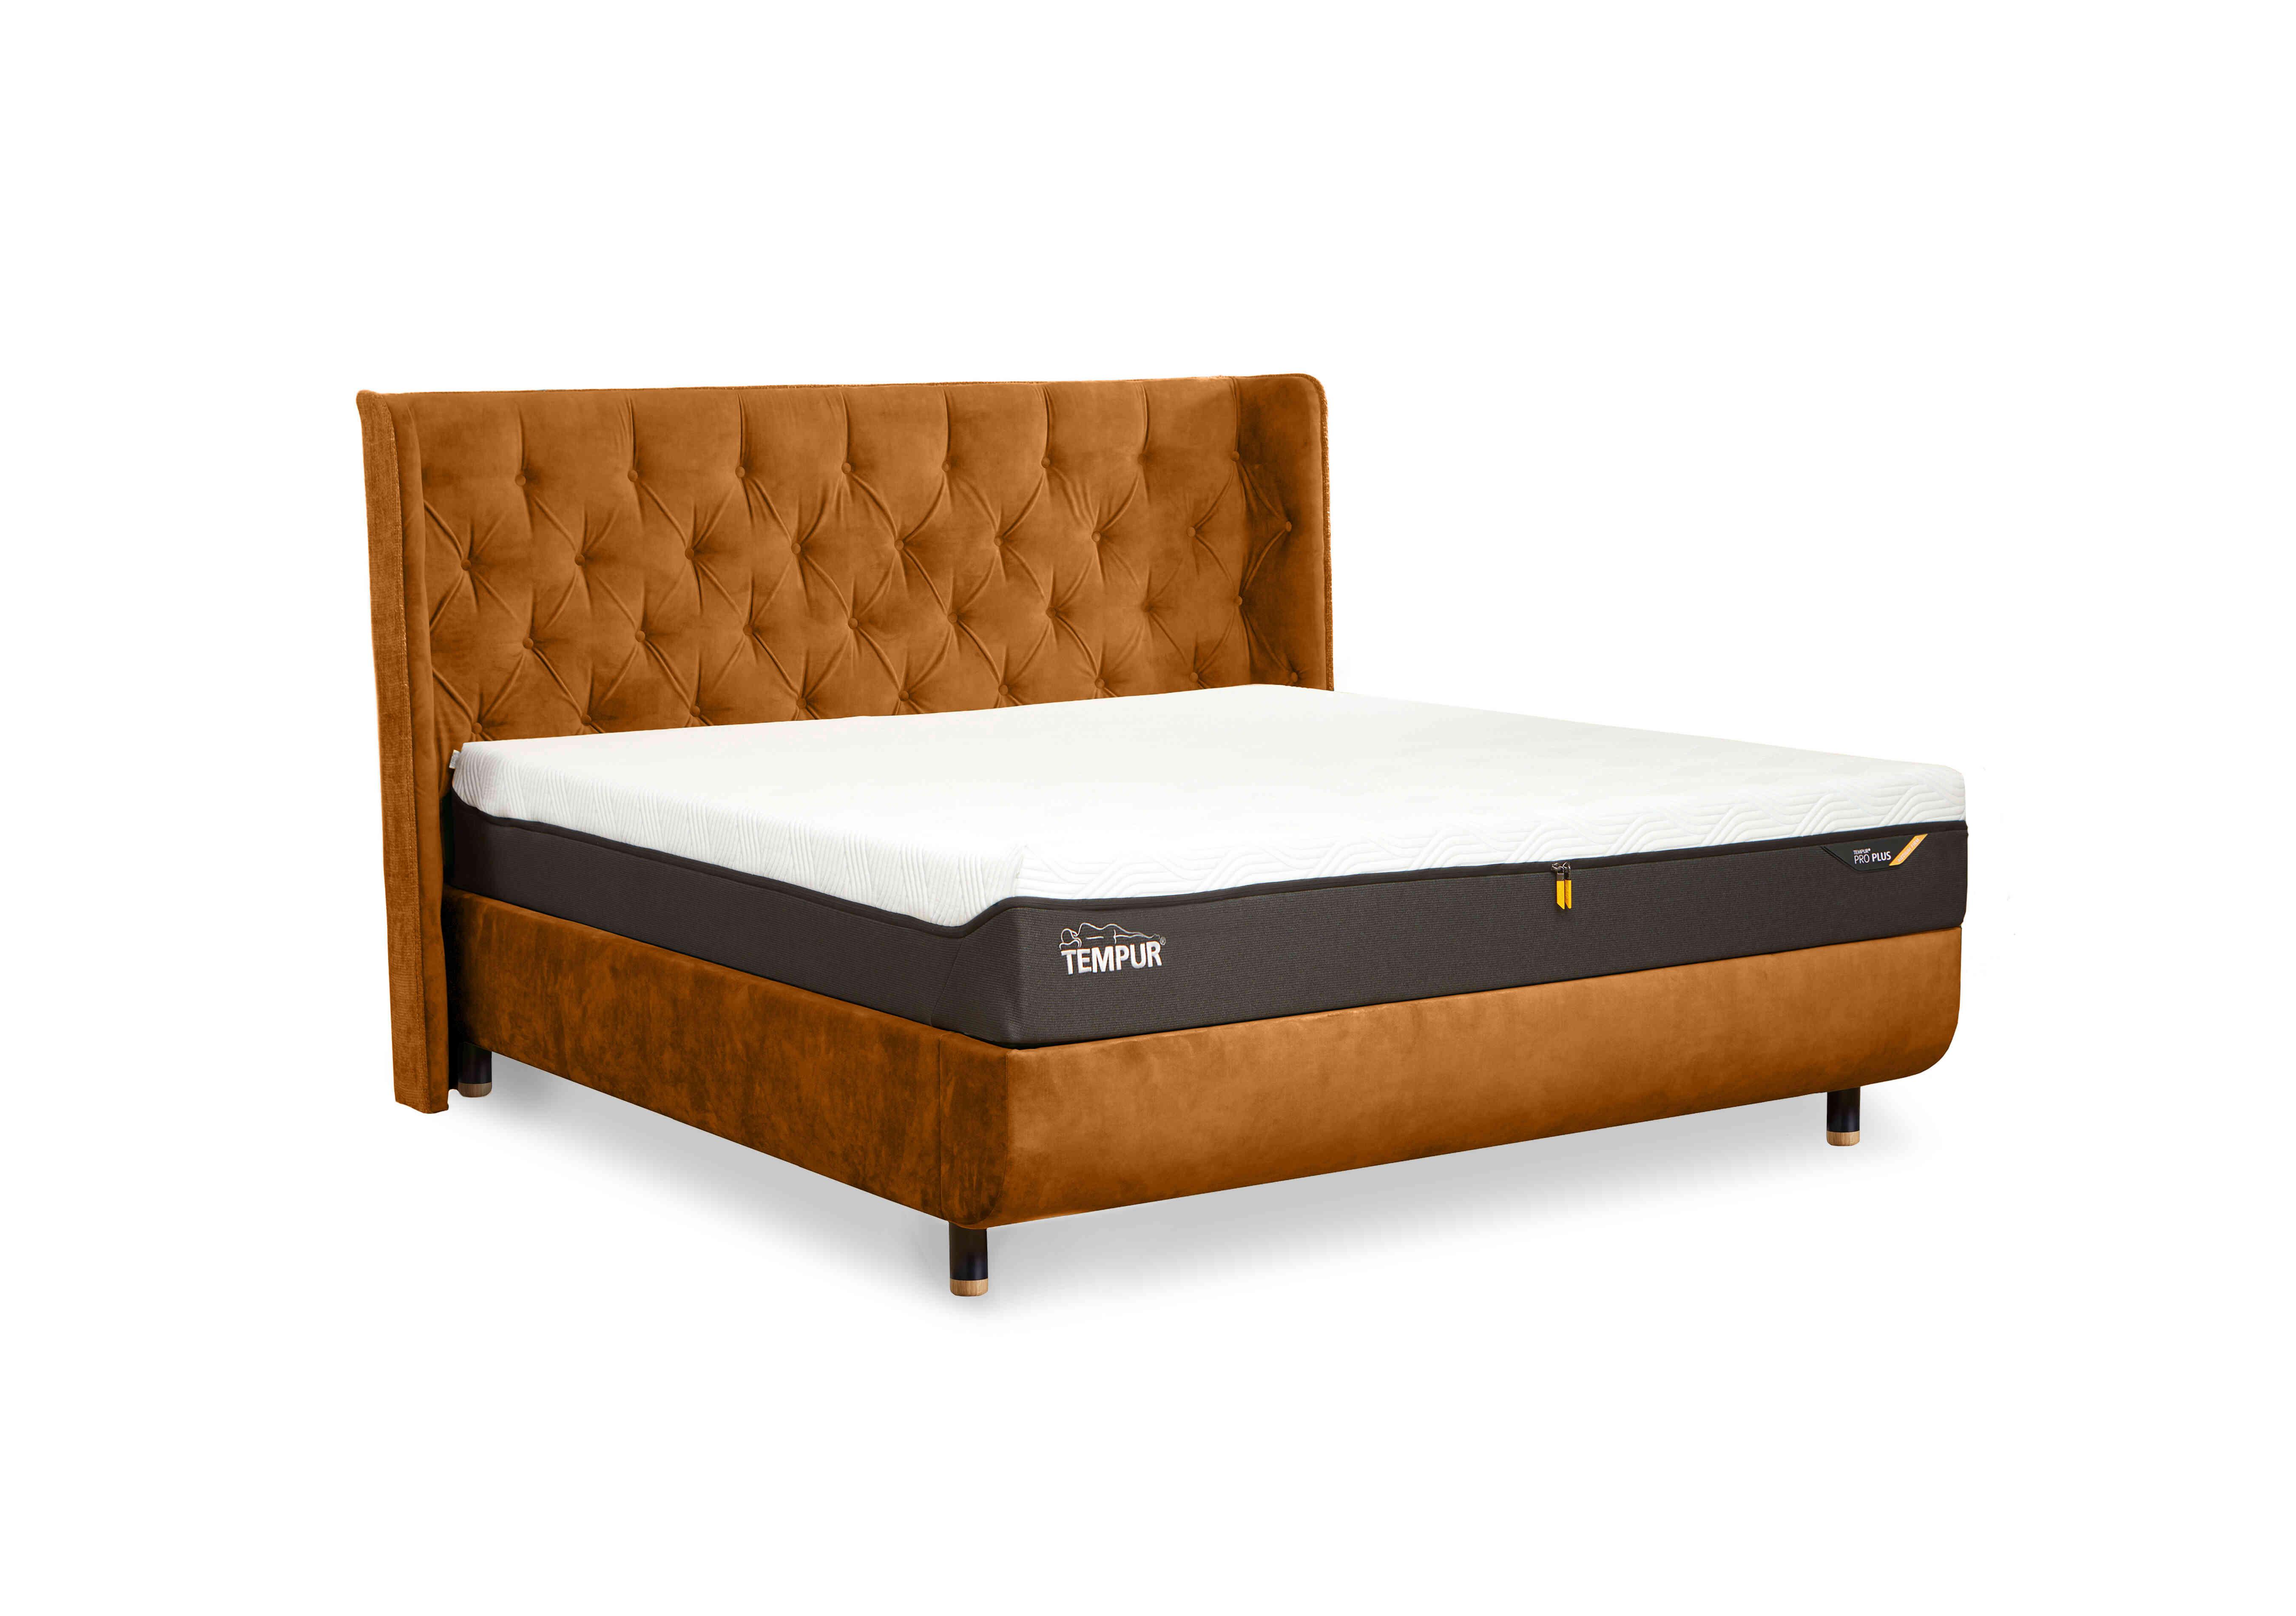 Arc Slatted Ottoman Bed Frame with Luxury Headboard in Gold/Mustard-Nat Ash Ft on Furniture Village